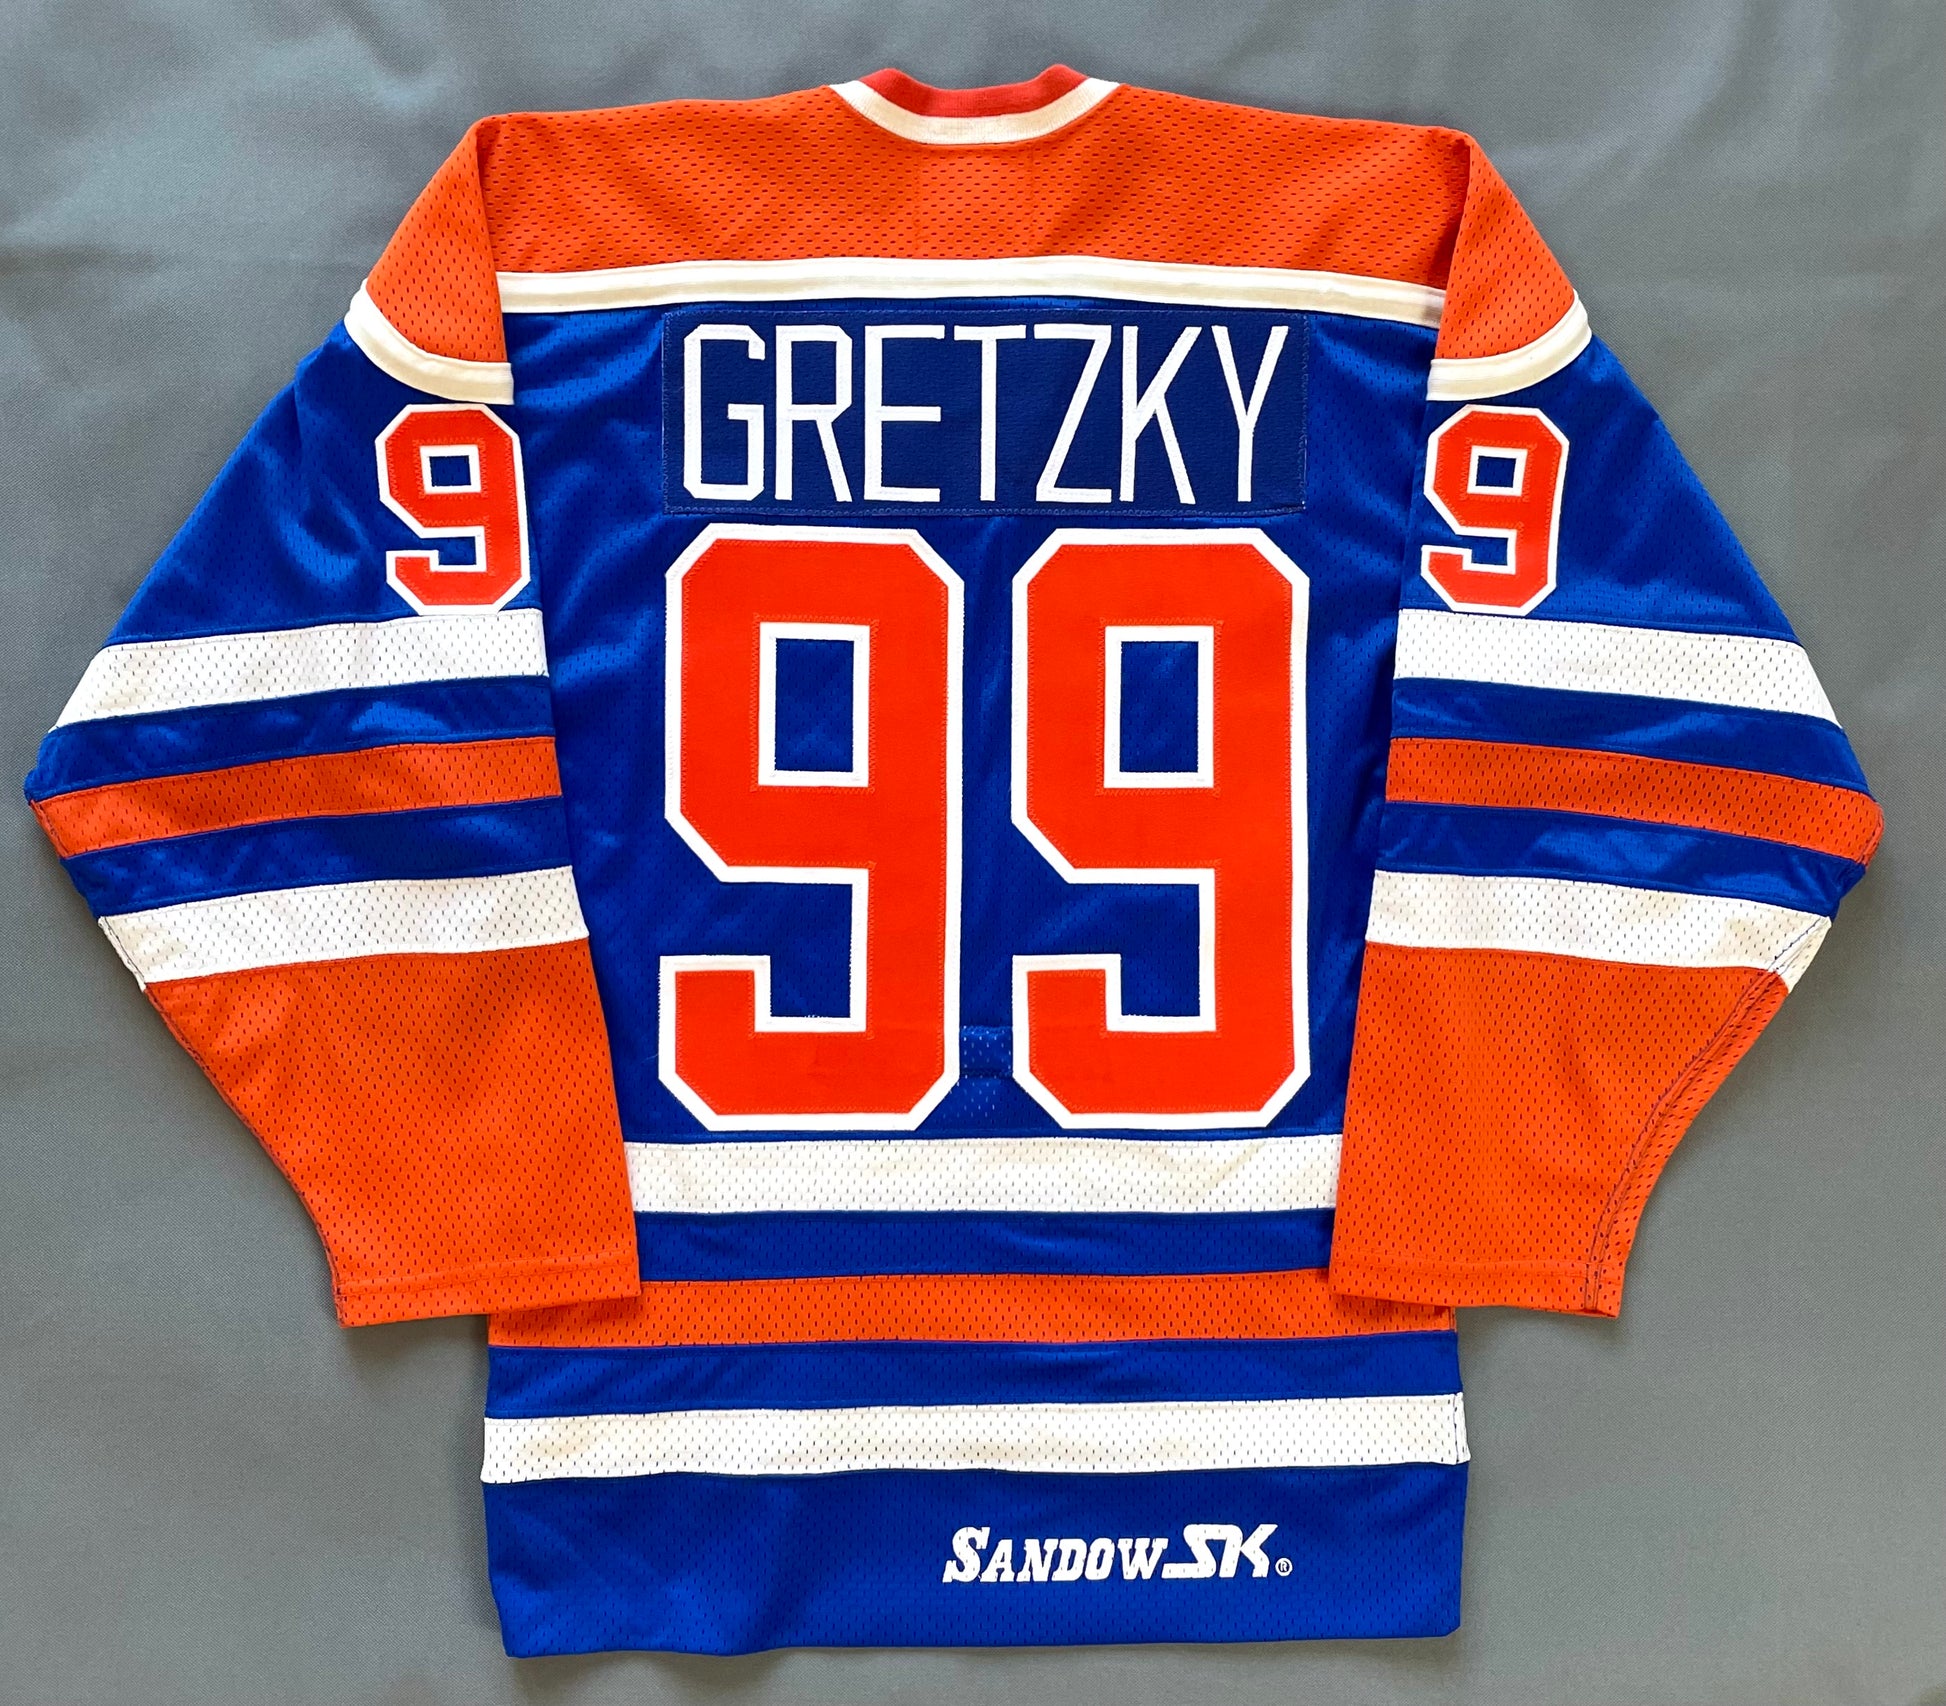 Find more Old School Edmonton Oilers Jersey From The 80s for sale